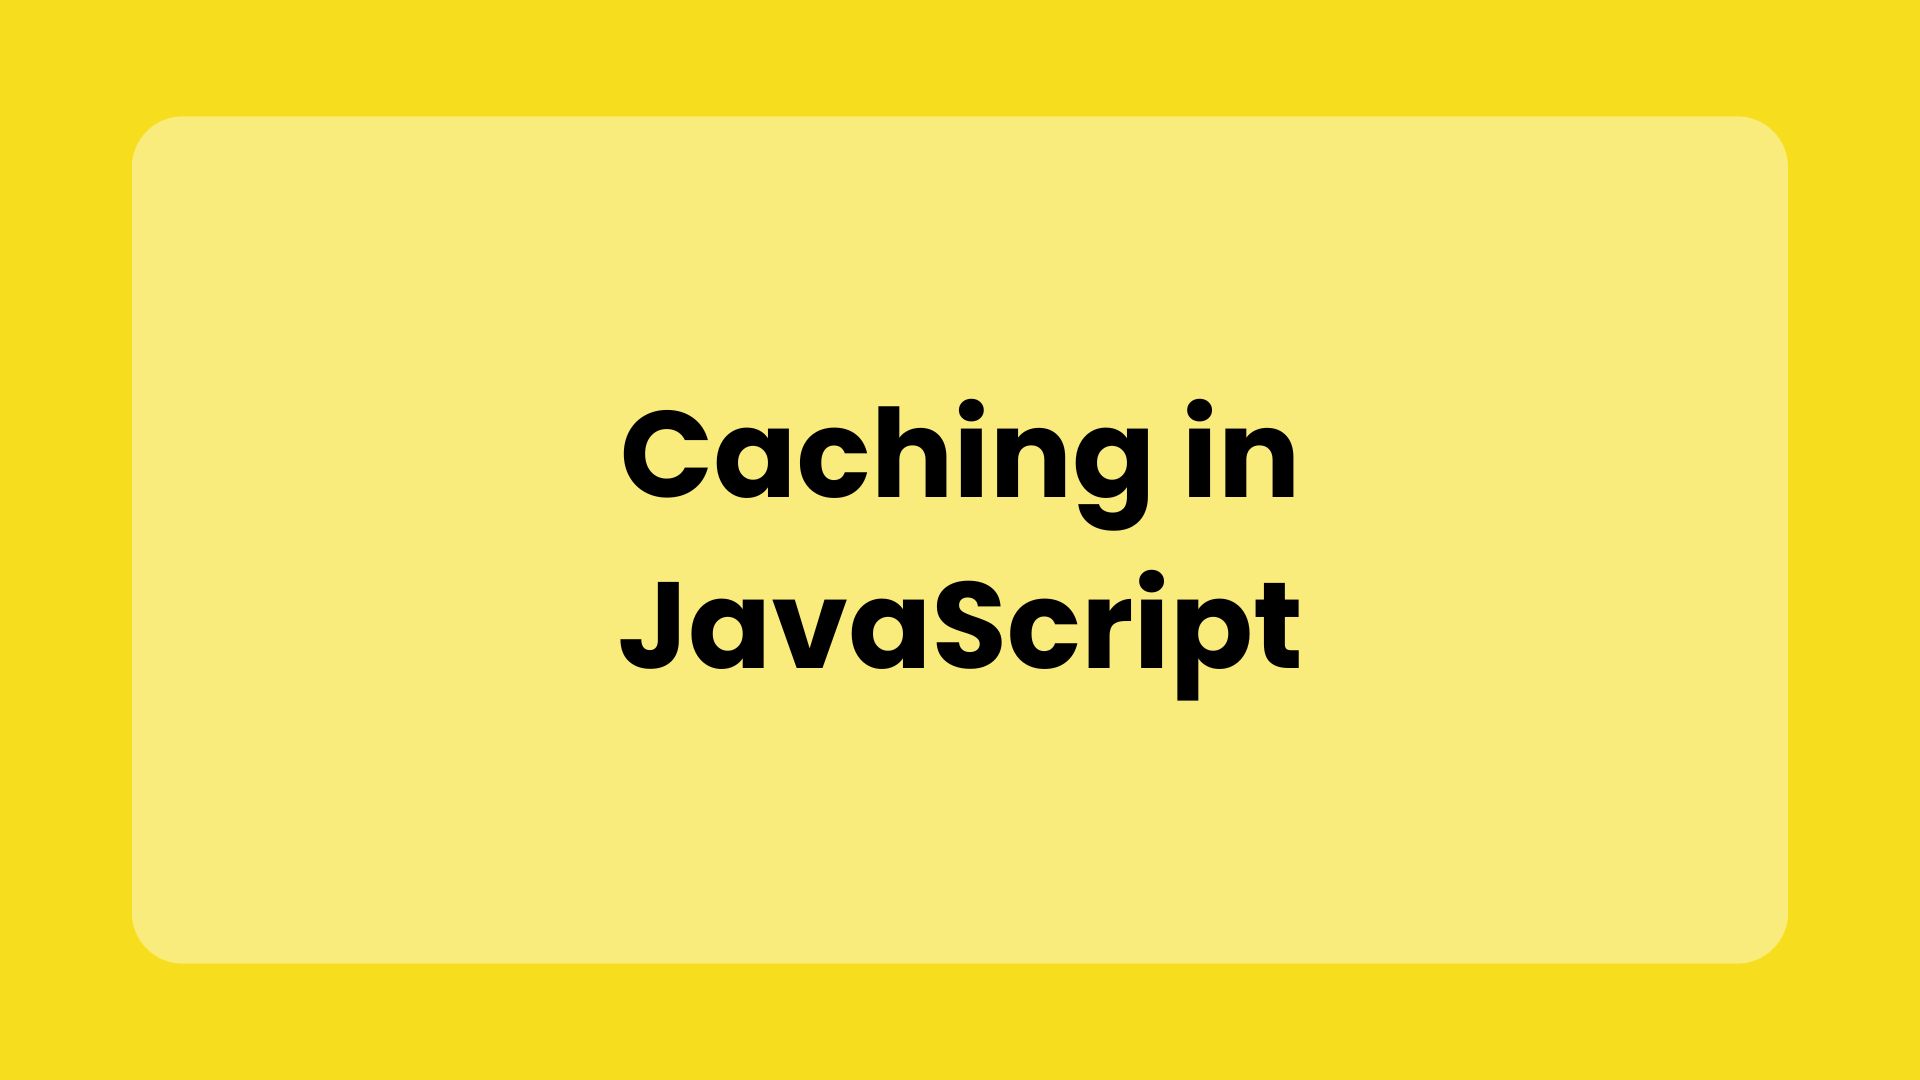 Caching in JavaScript image